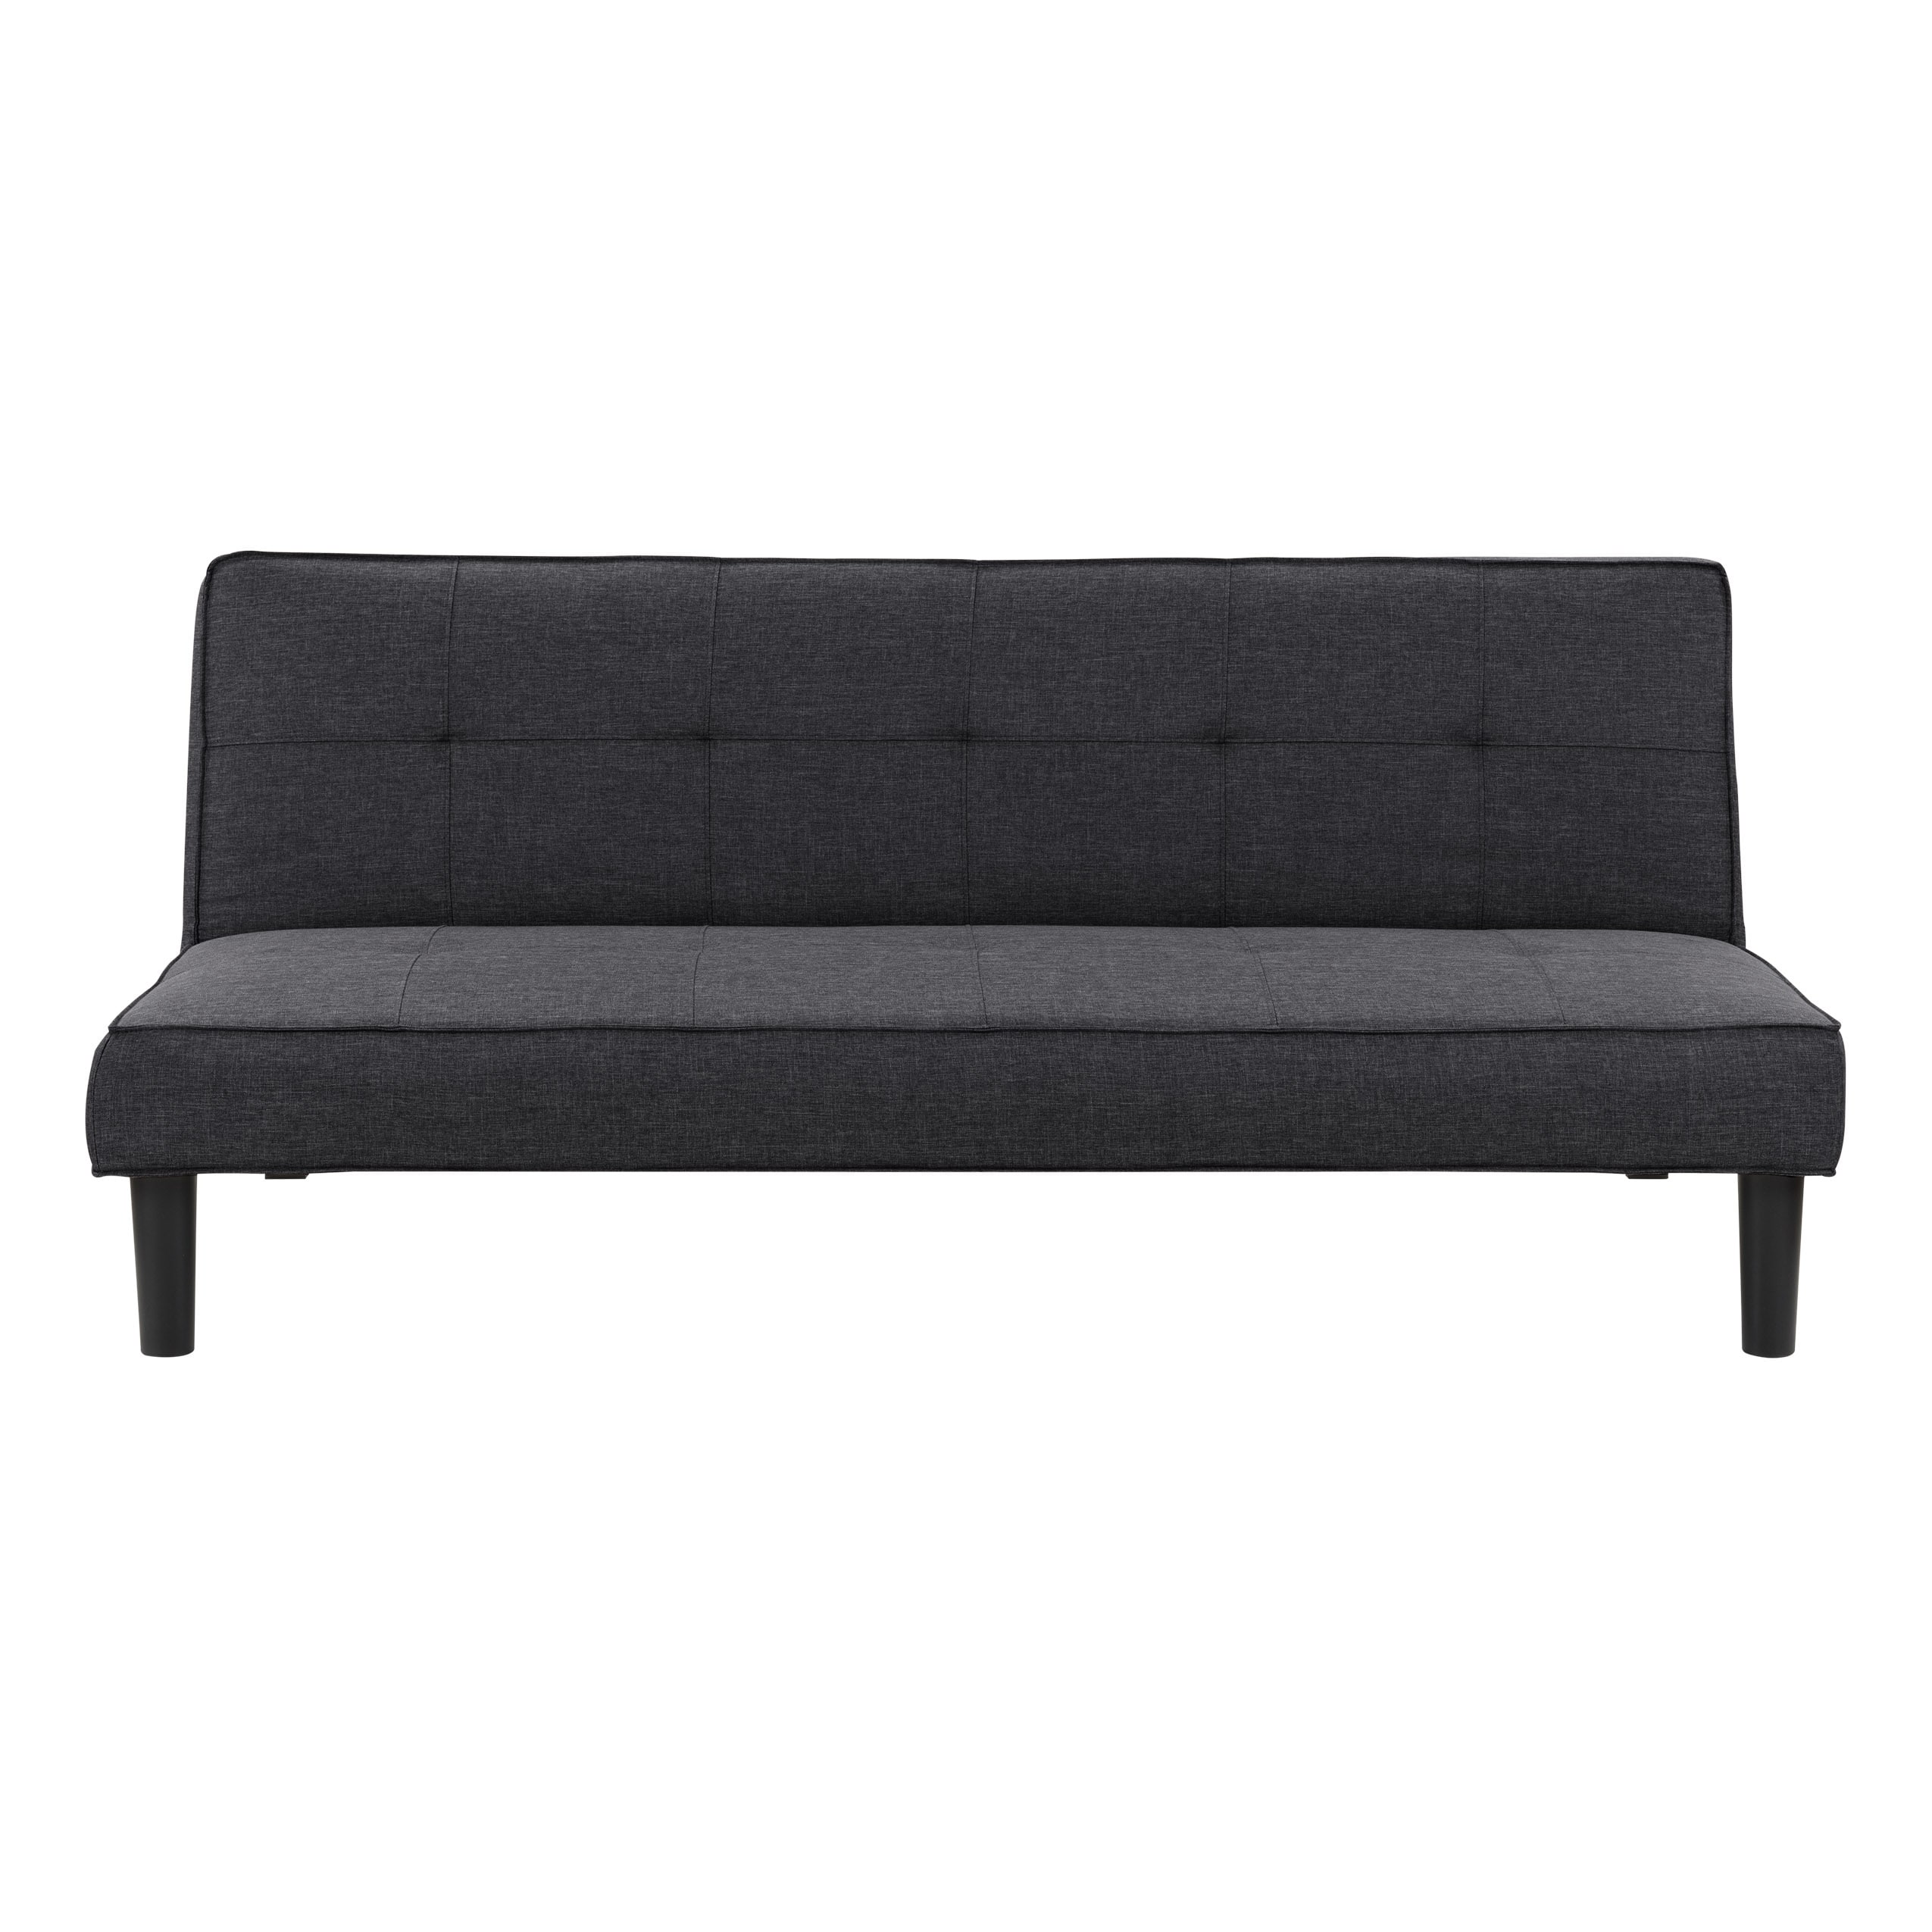 Corliving Yorkton Dark Grey Contemporary Modern Polyester Twin Futon In The Futons Sofa Beds Department At Lowes Com